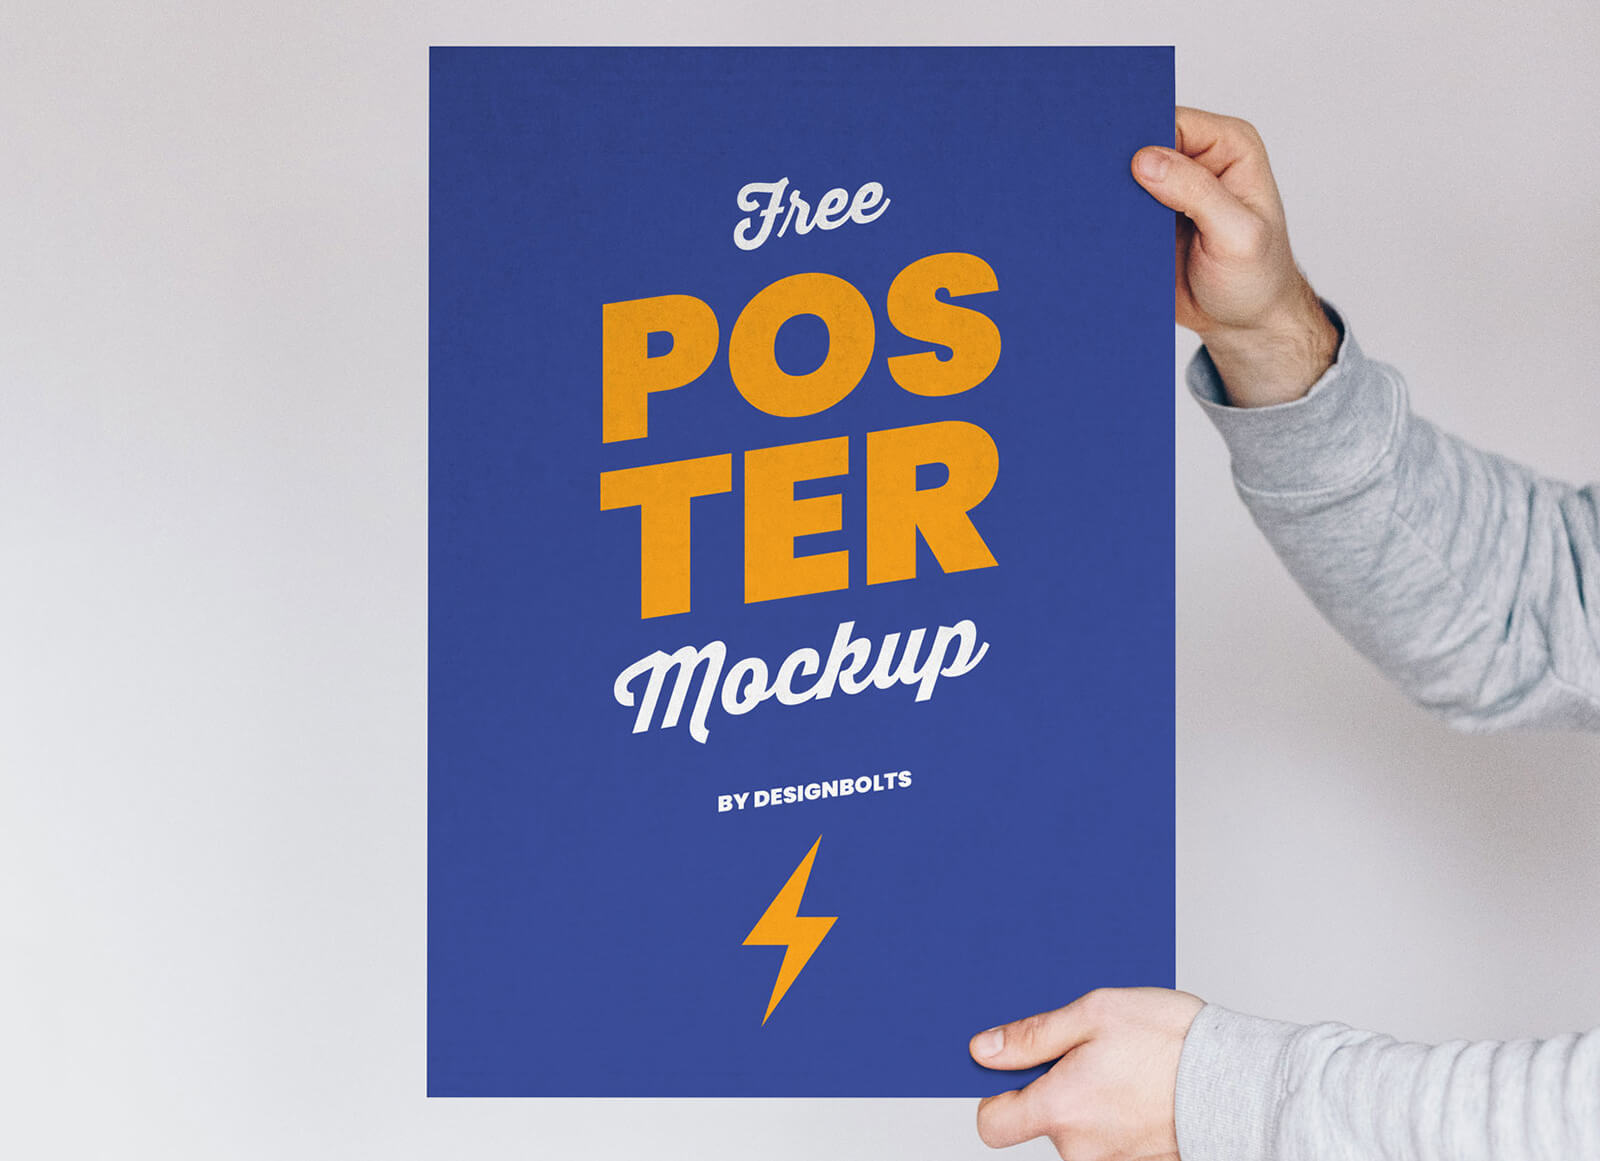 Free-Hand-Holding-Poster-Mockup-PSD